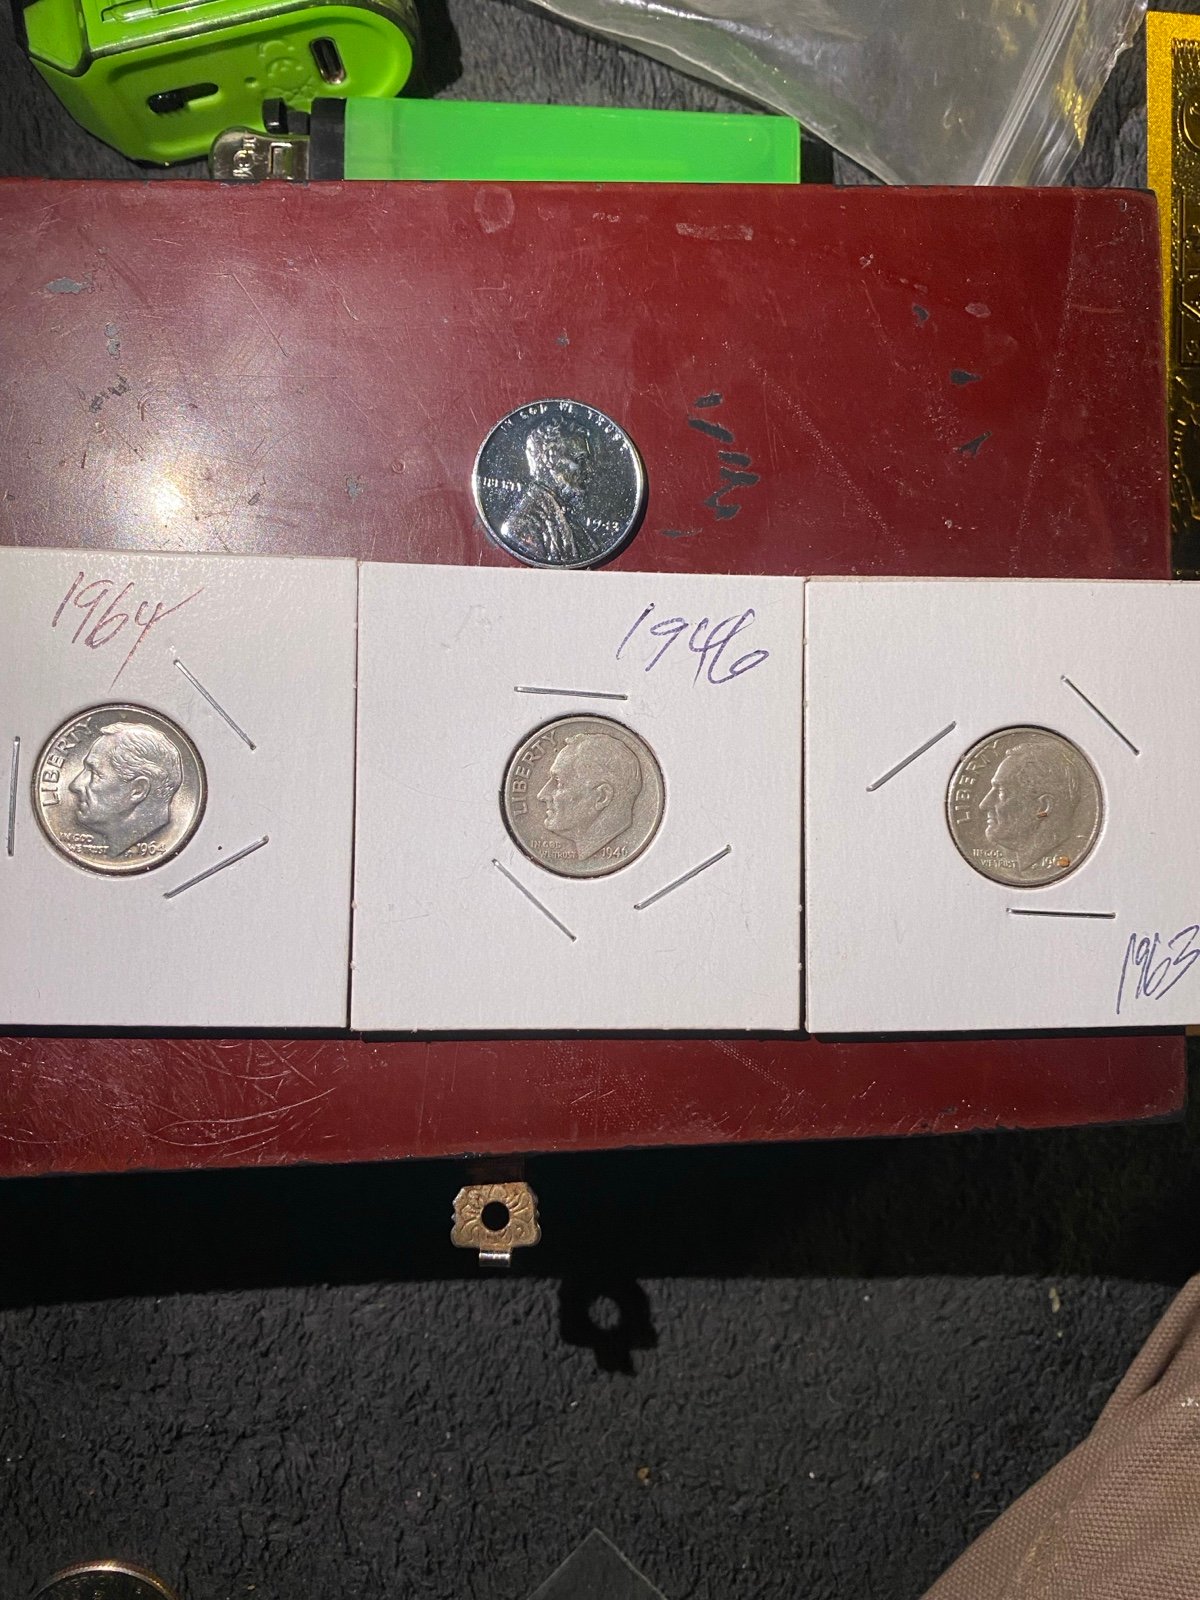 Three Roosevelt, Silver dimes, 1963, 1946 and 1964, and